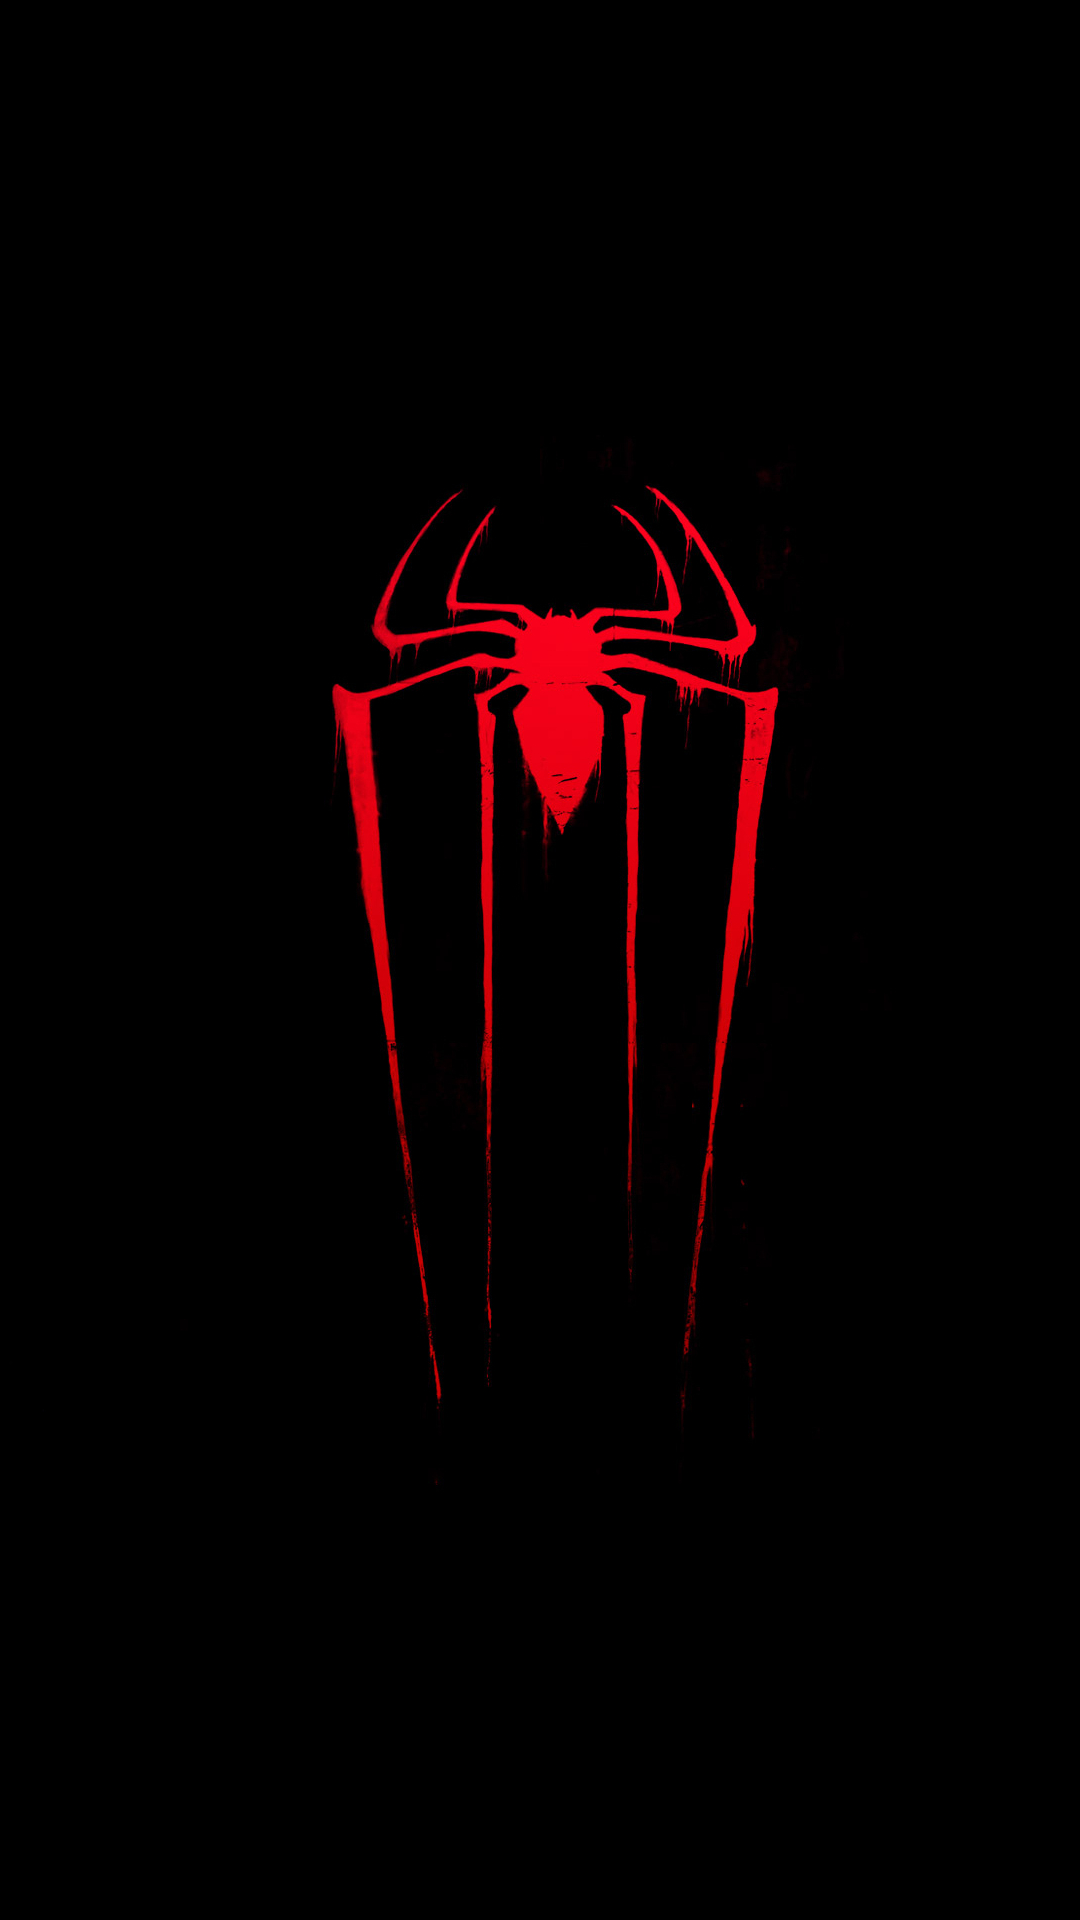 Free download AQUOS Phone XX 106SH Wallpapers Spiderman logo android wallpaper 1080x1920 for ...